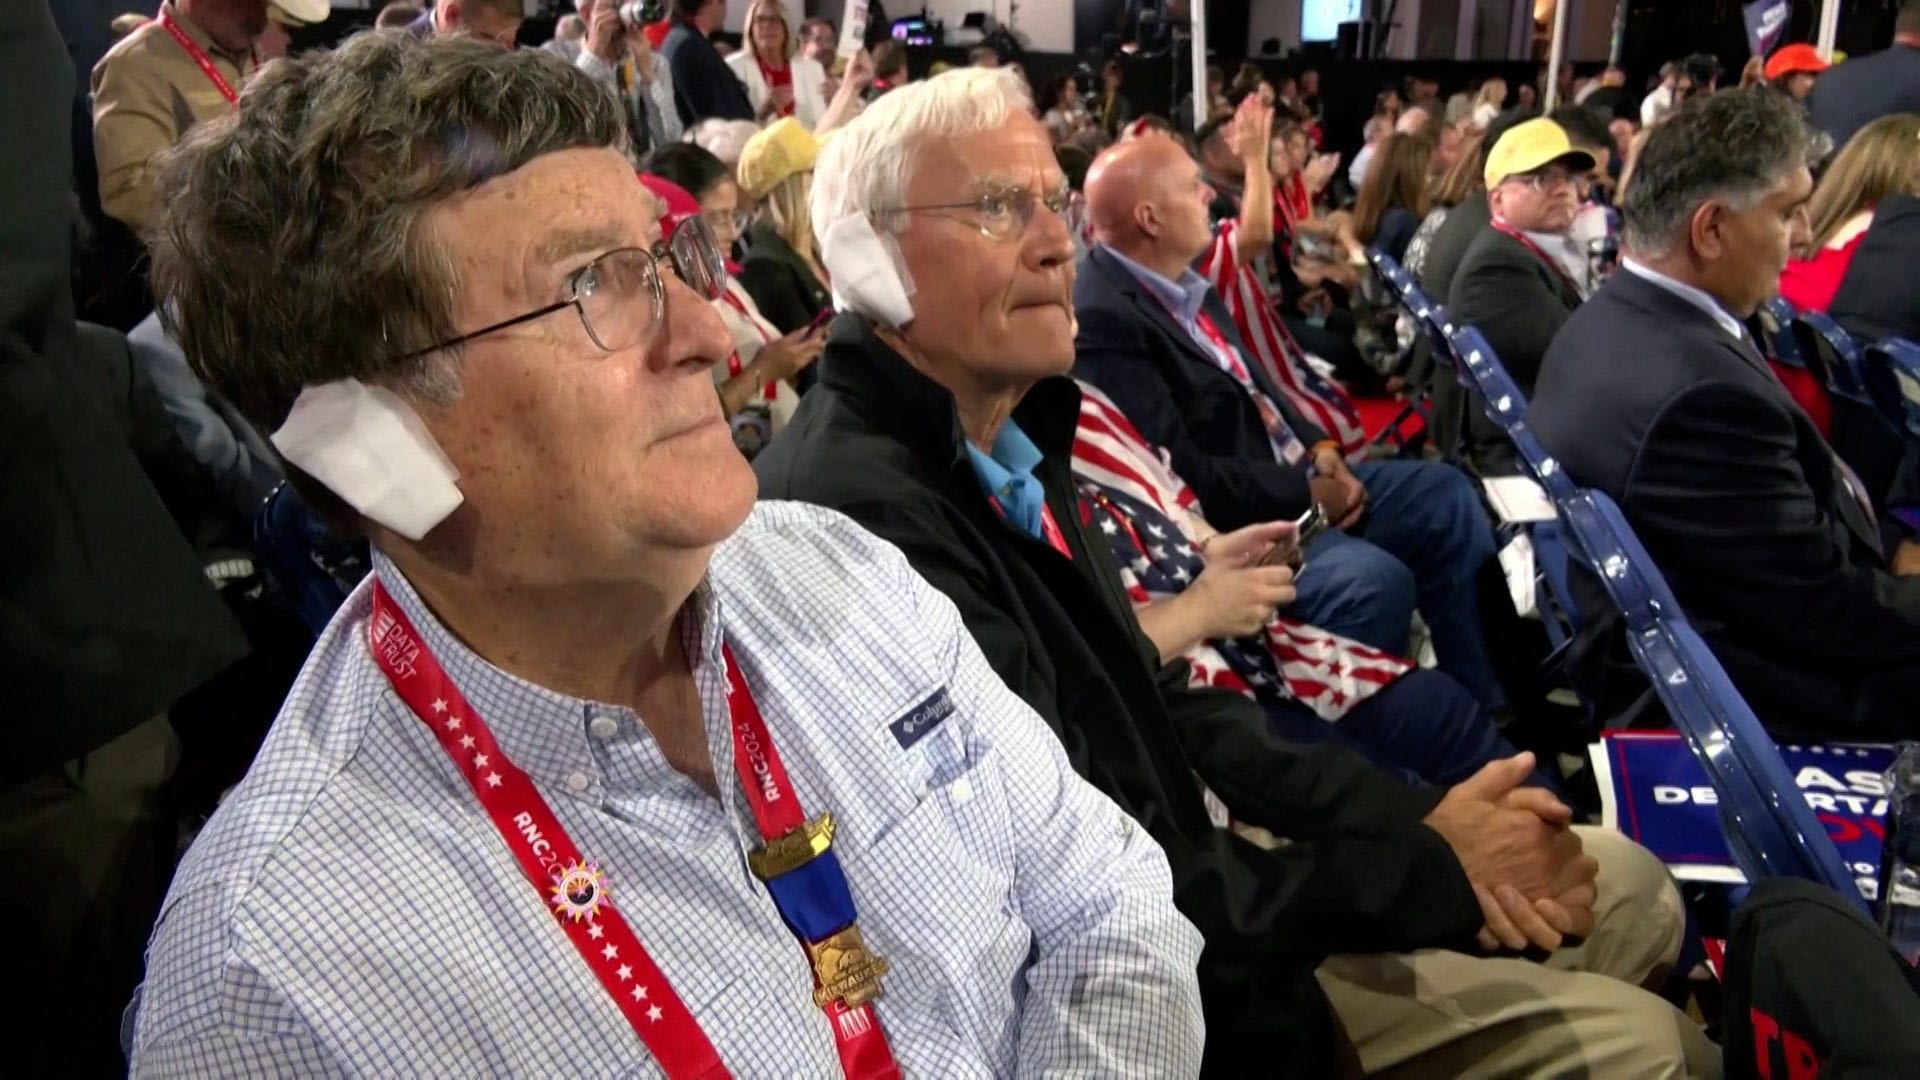 'Fashion statement?' Ear bandages to support Donald Trump became accessory at RNC; drew mixed opinions